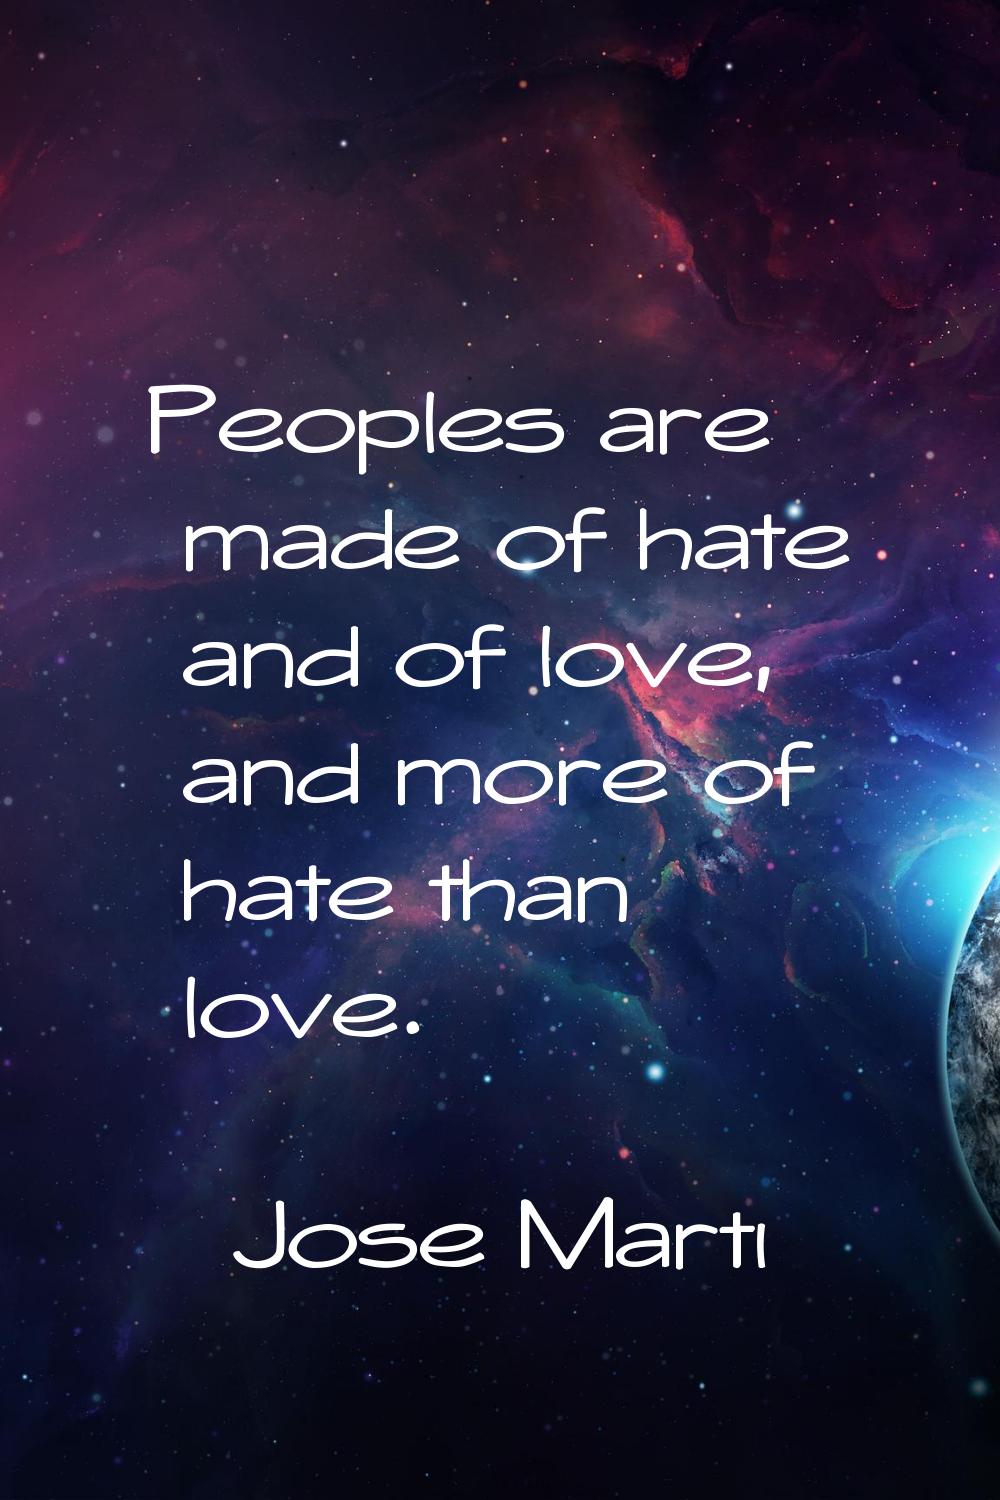 Peoples are made of hate and of love, and more of hate than love.